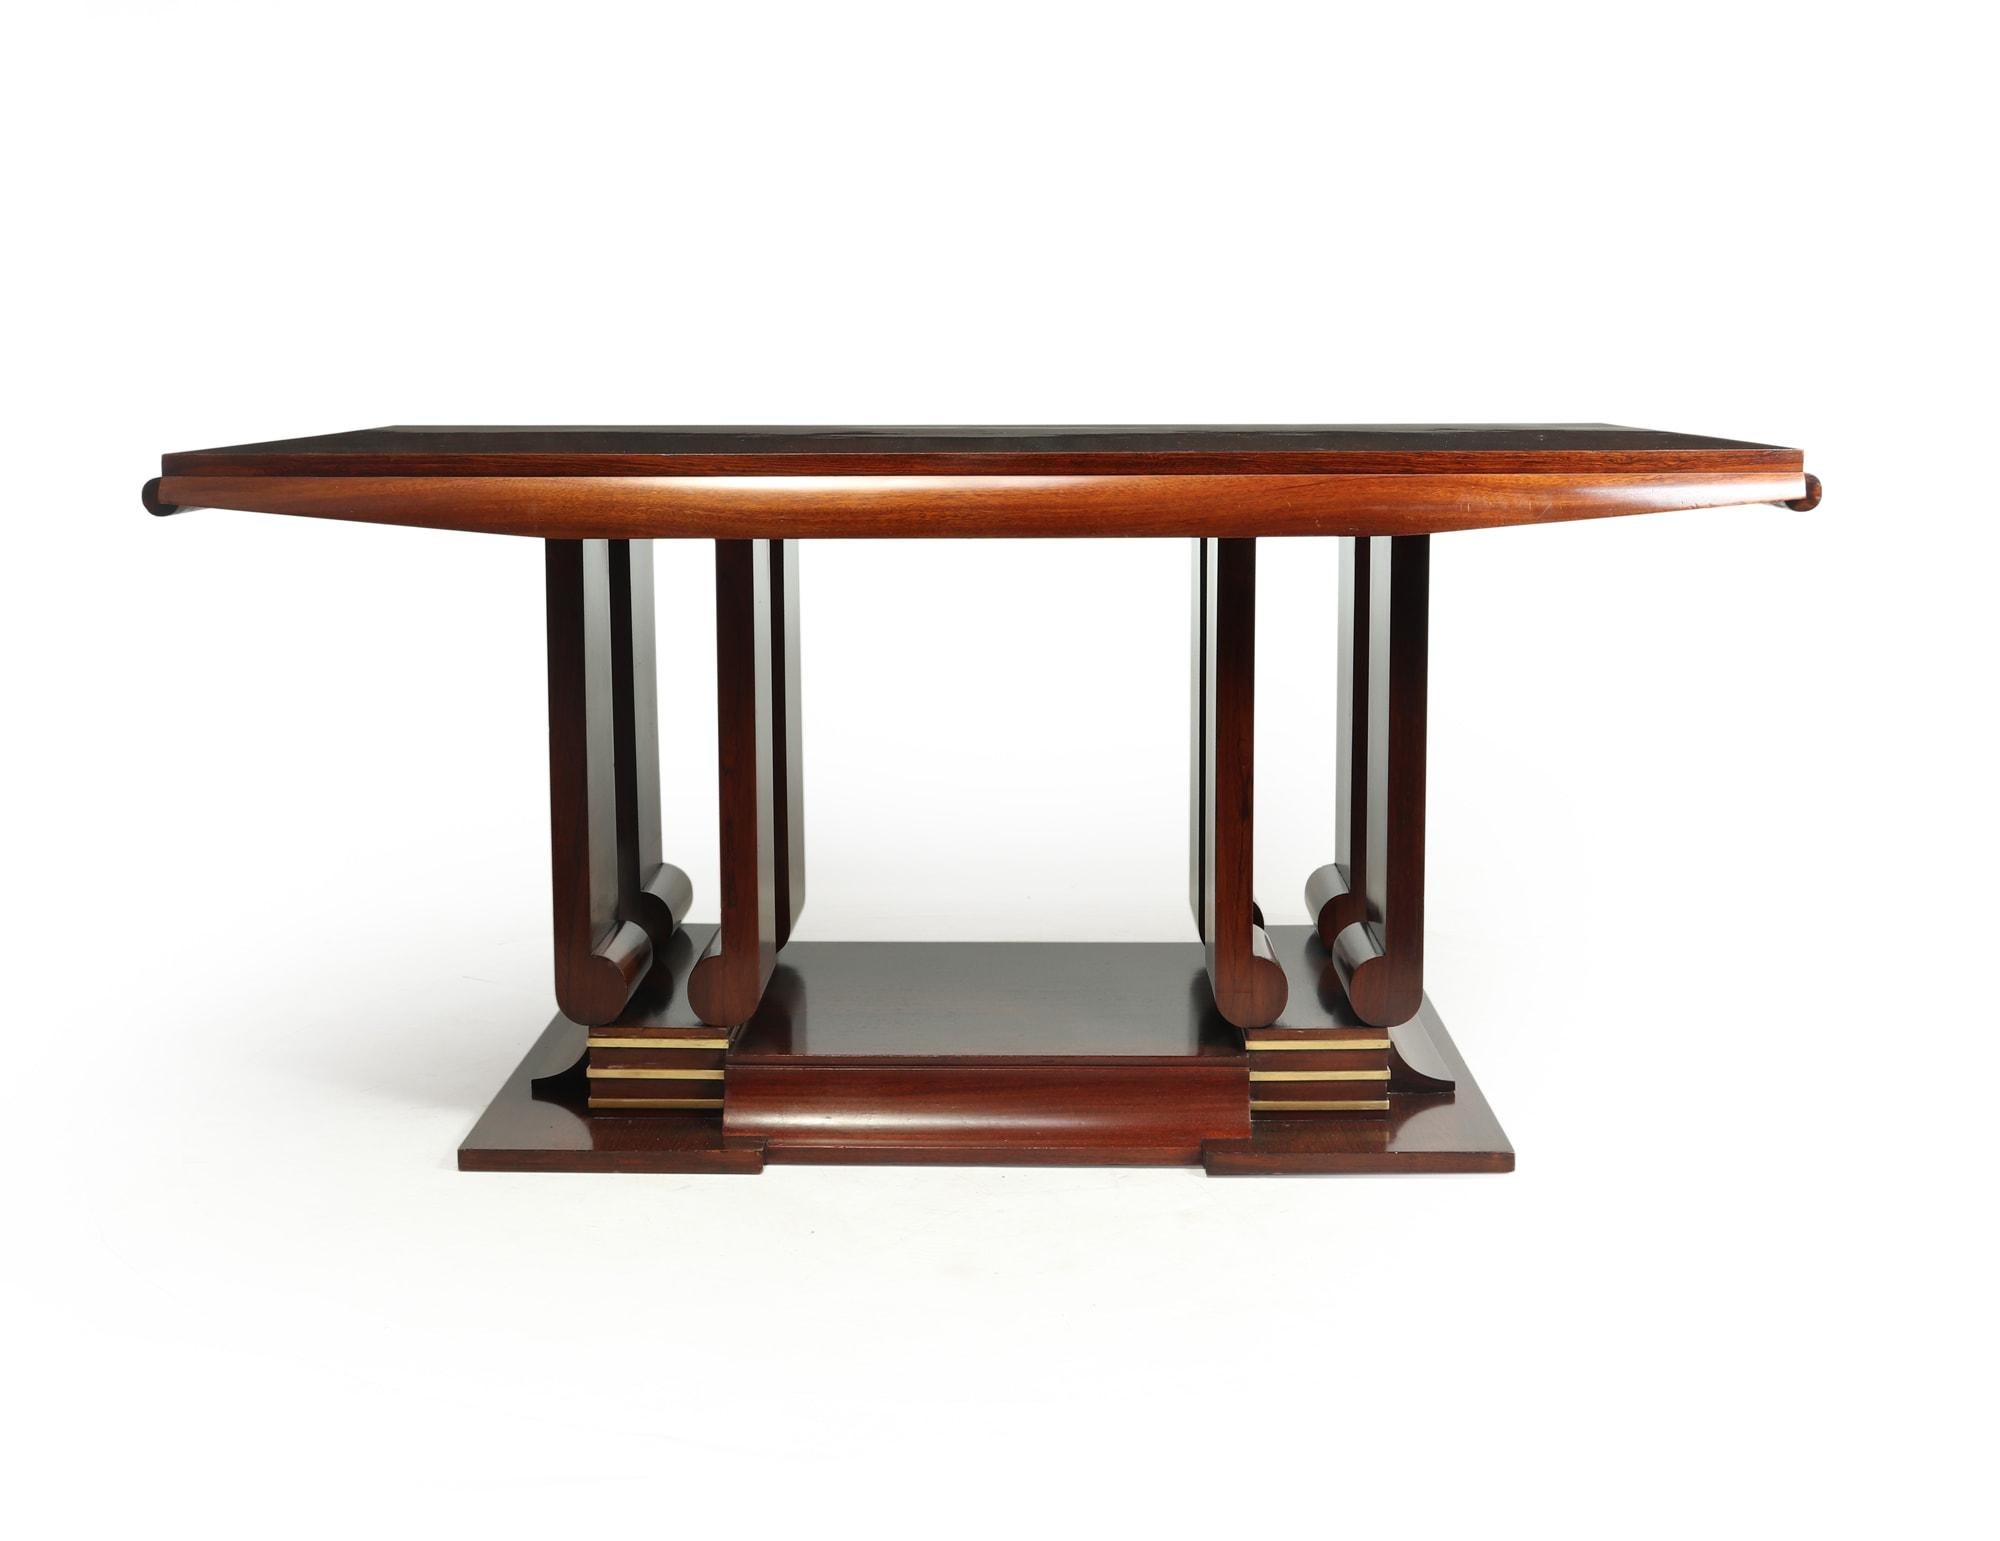 An extendable dining table produced in France in the 1930’s in rosewood on oak, a stunning centre column with heavy brass detail around the lower section, the top extends either ender to seat up to four more people.

The table is extremly well